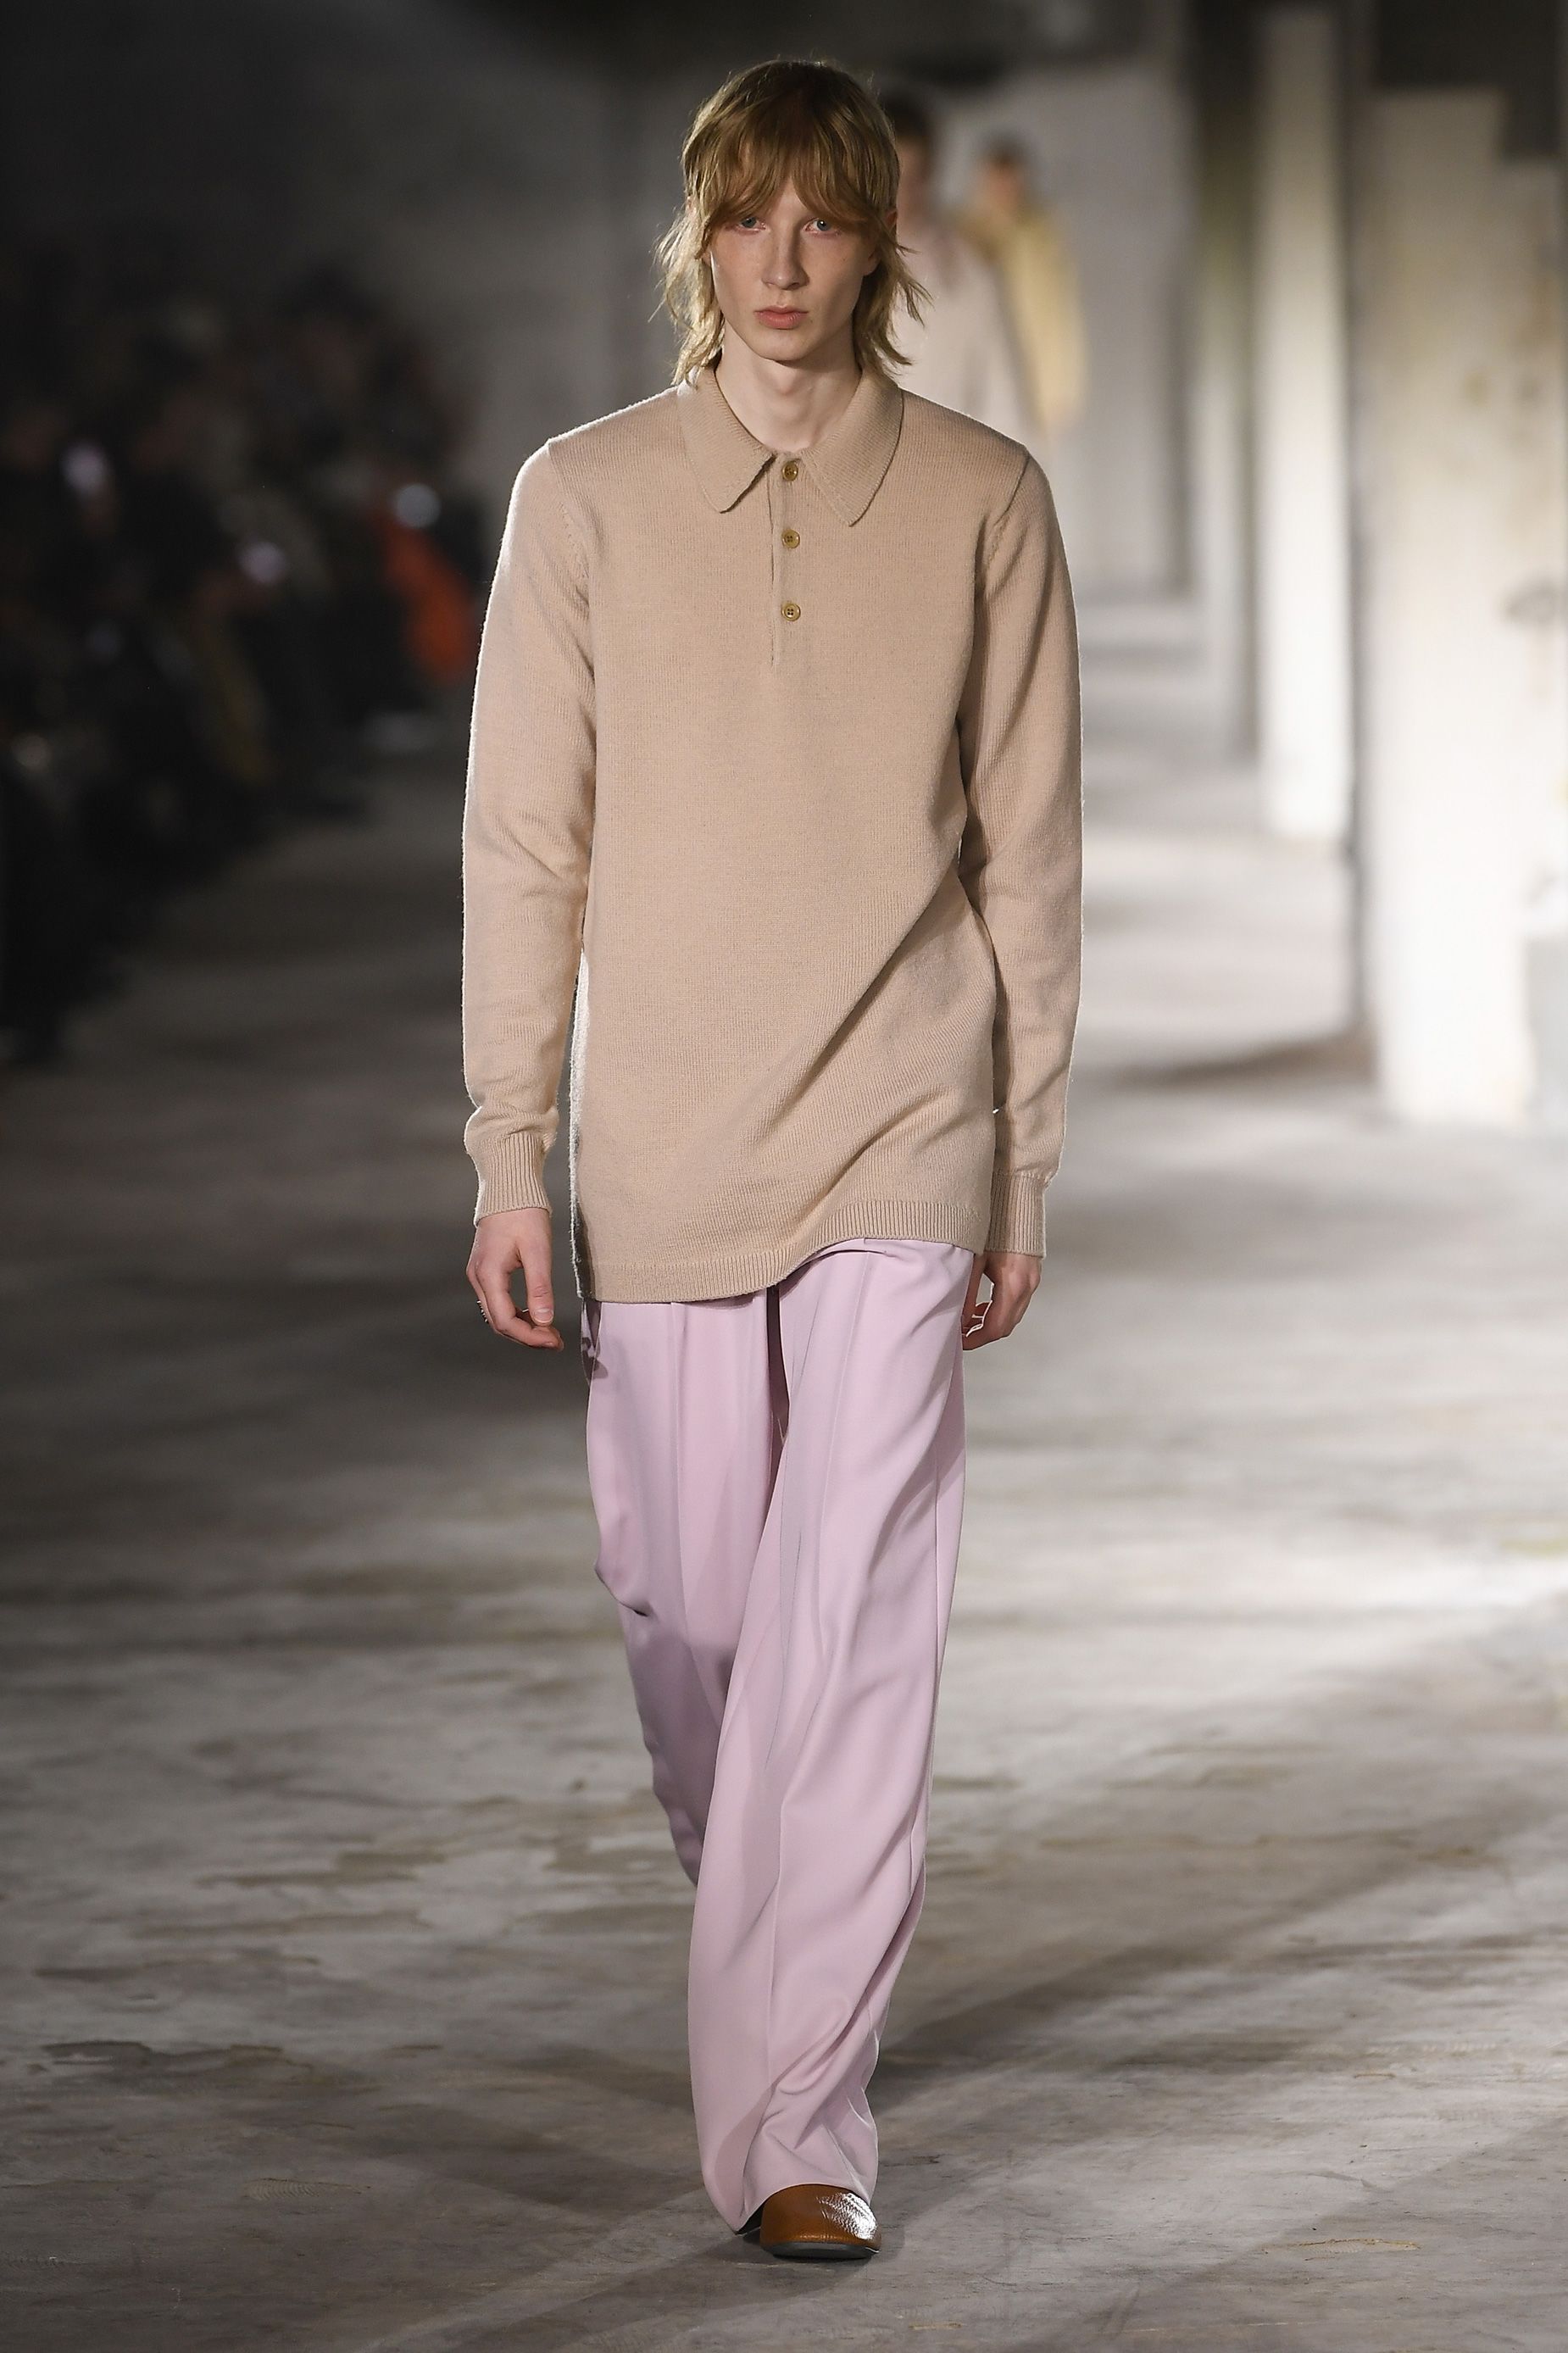 Minimalist leather flats were the order of the season at Dries Van Noten.